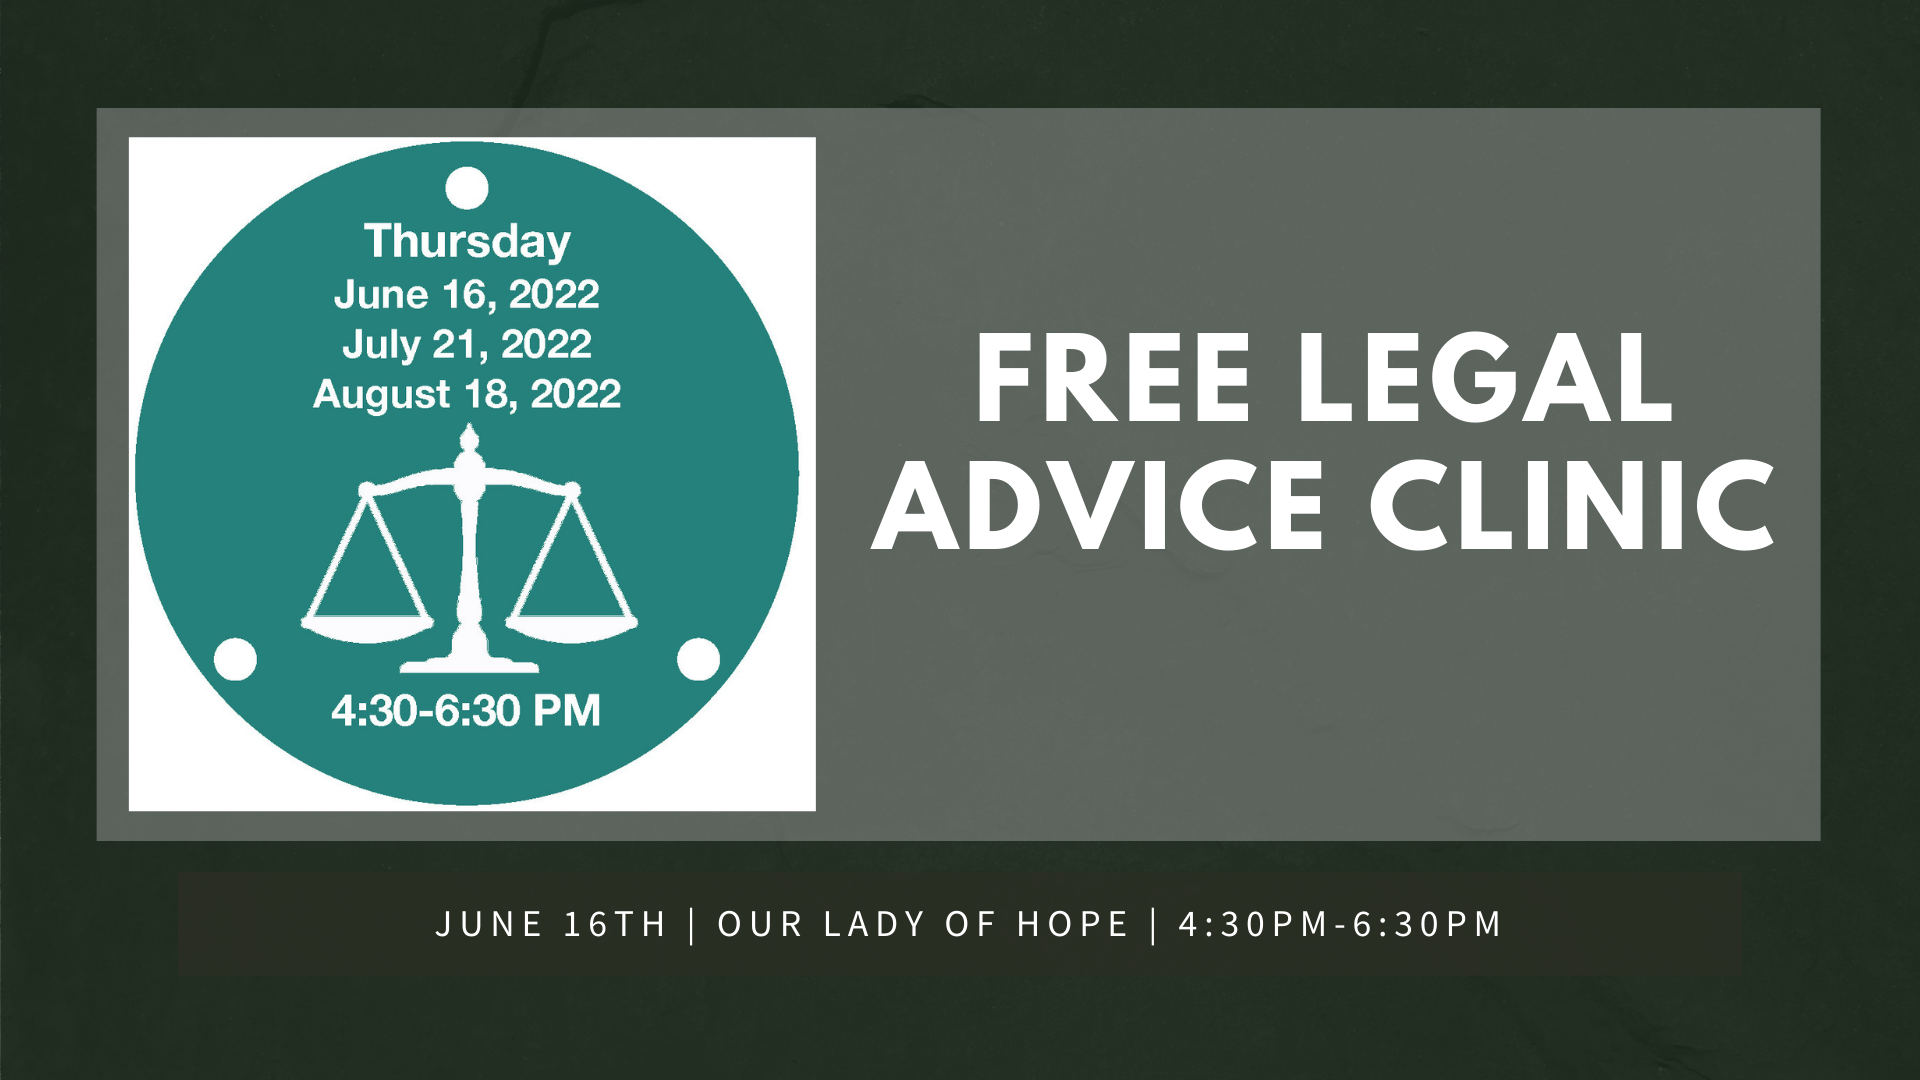 Flyer for free legal advice clinic on June 16th, 2022 at Our Lady of Hope Church